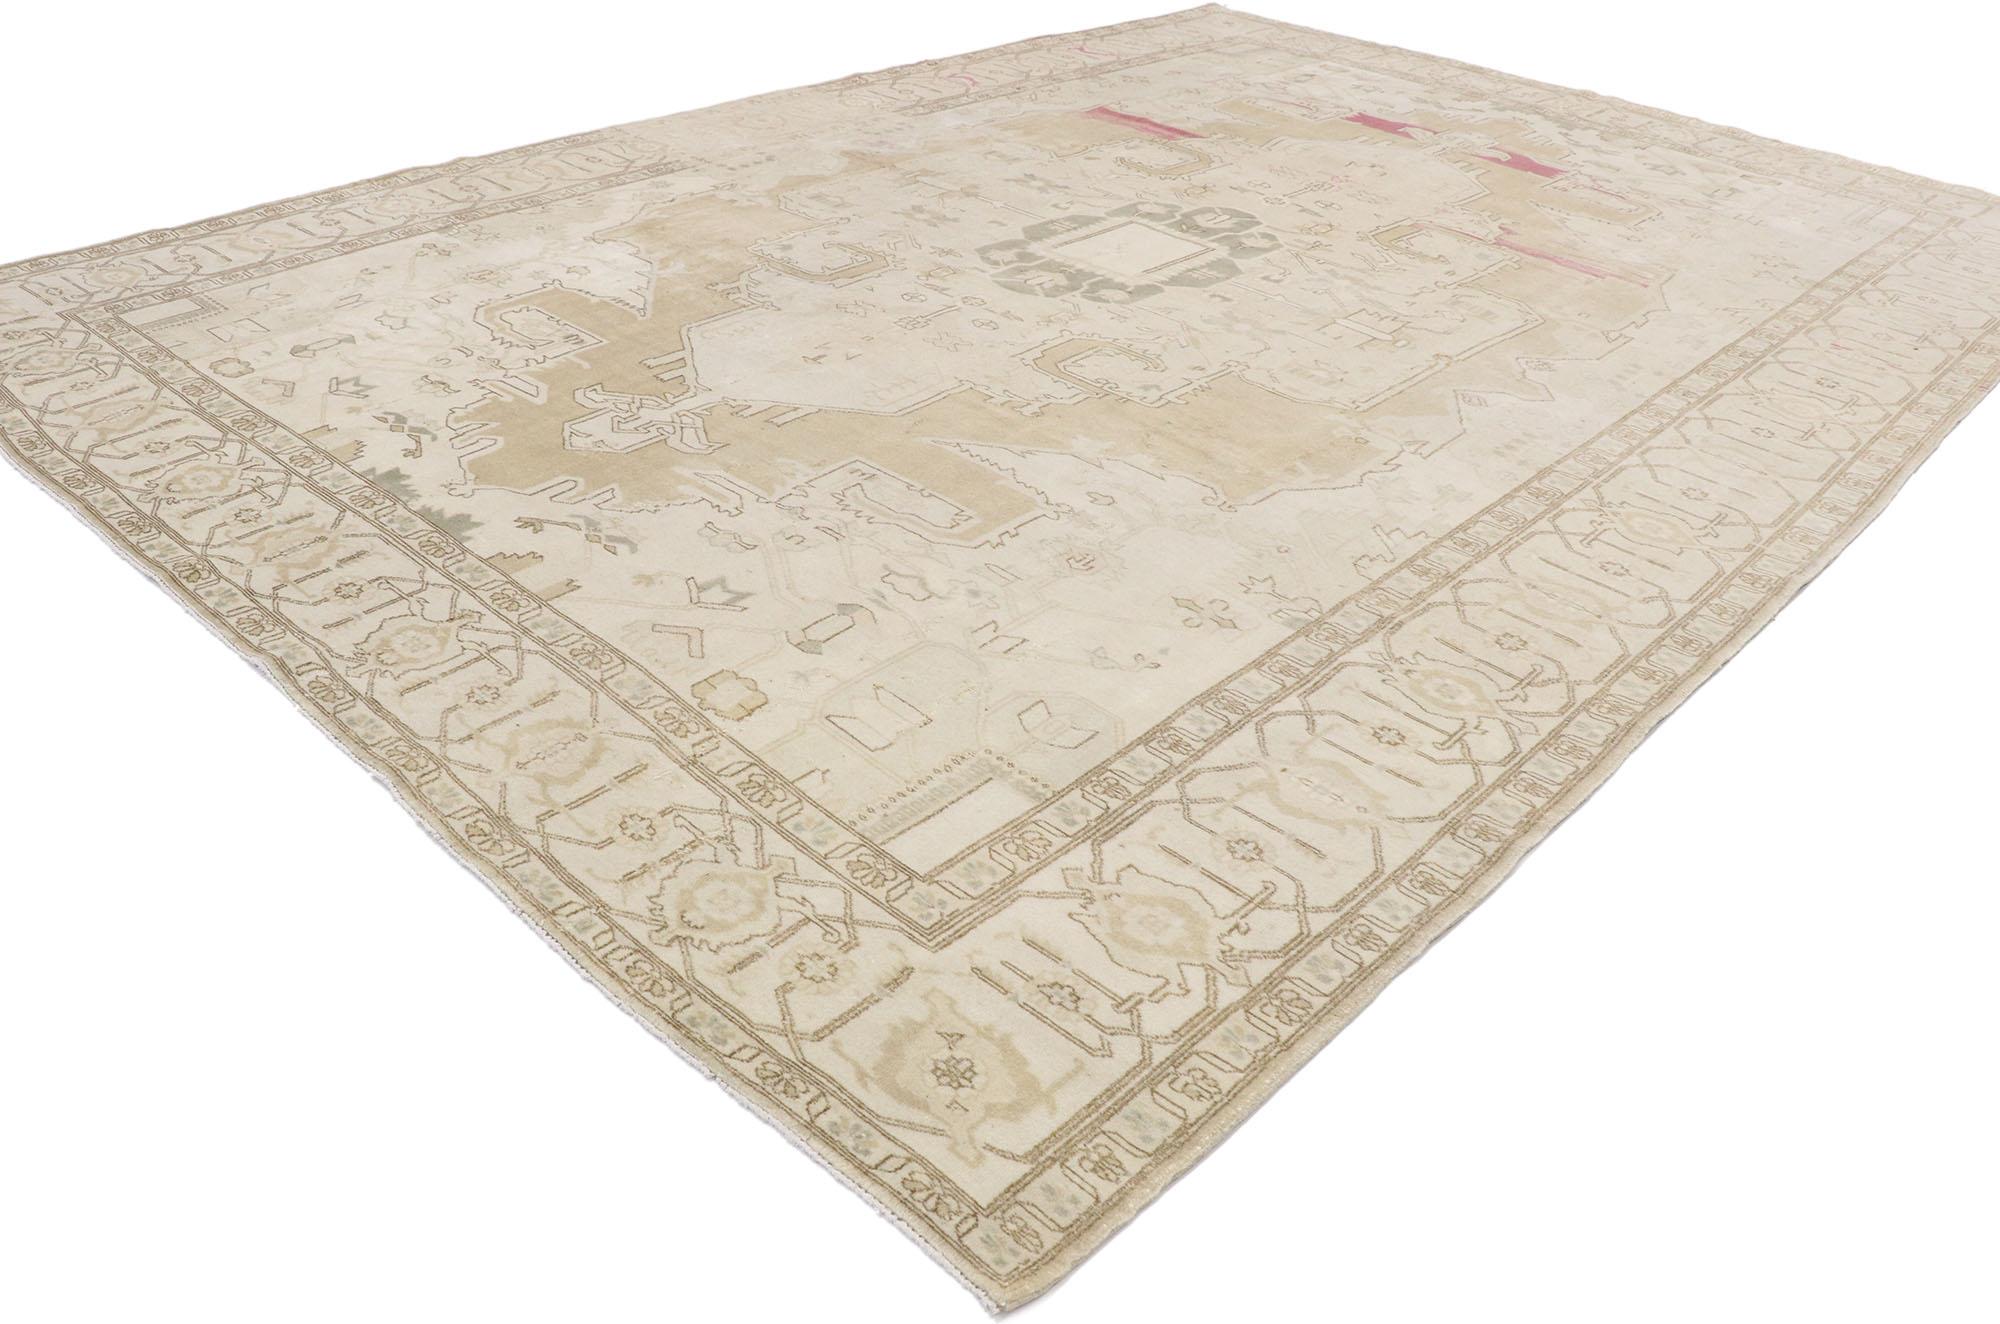 53239 vintage Turkish Kars rug with Mid-Century Modern style. Effortless beauty and feminine connotations meet soft, bespoke vibes with a Mid-Century Modern style in this hand knotted wool vintage Turkish Kars rug. The antique washed field features